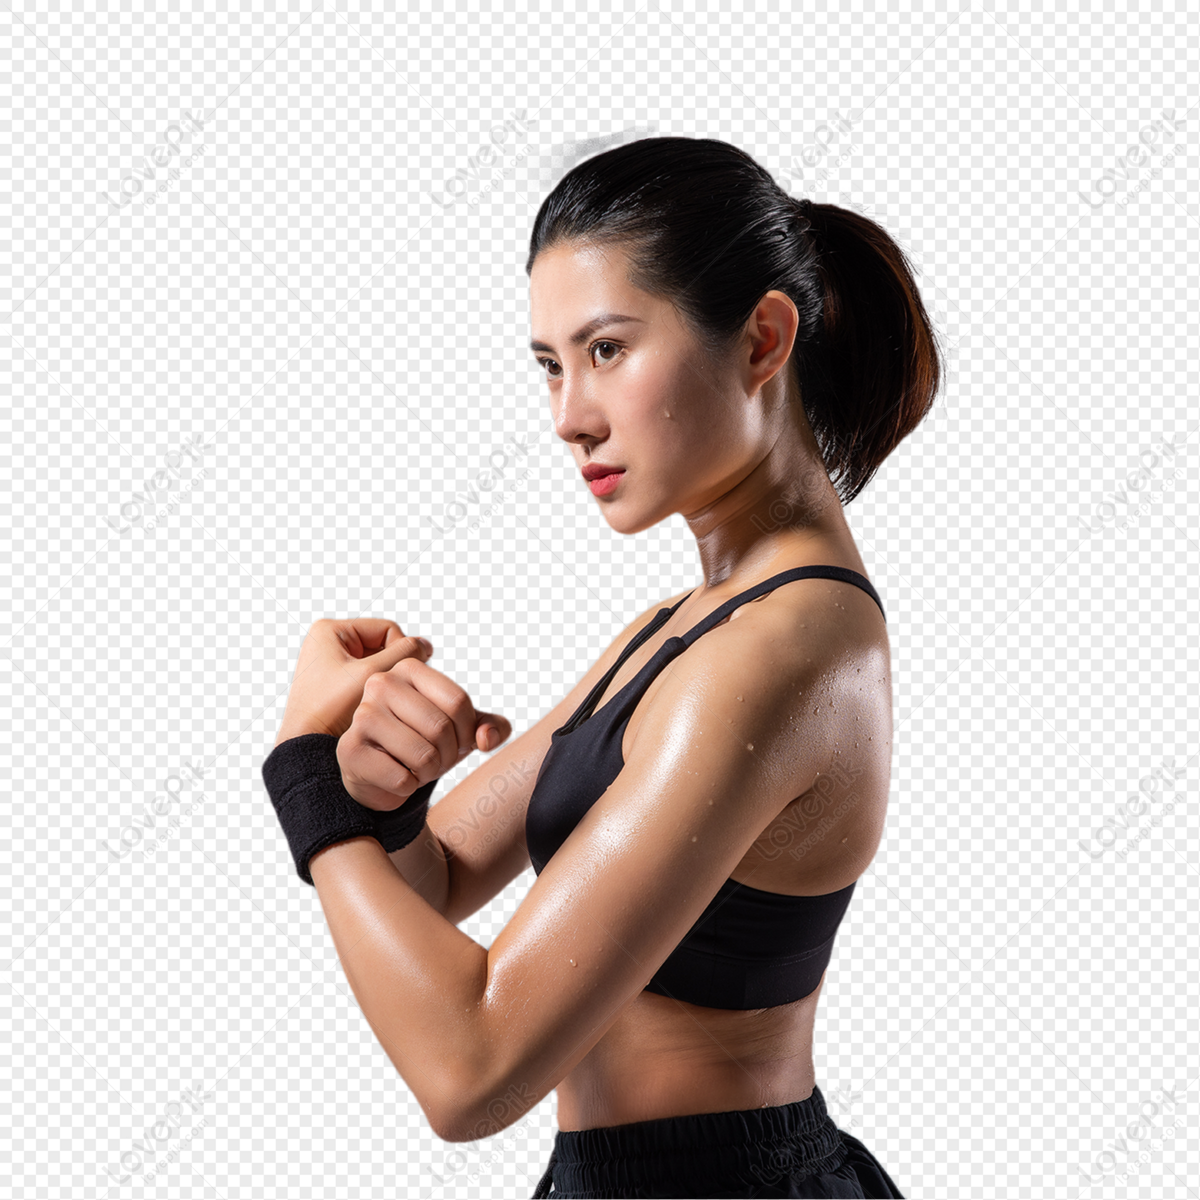 Premium PSD  A woman showing her muscles with the words fitness and fitness  on the back.